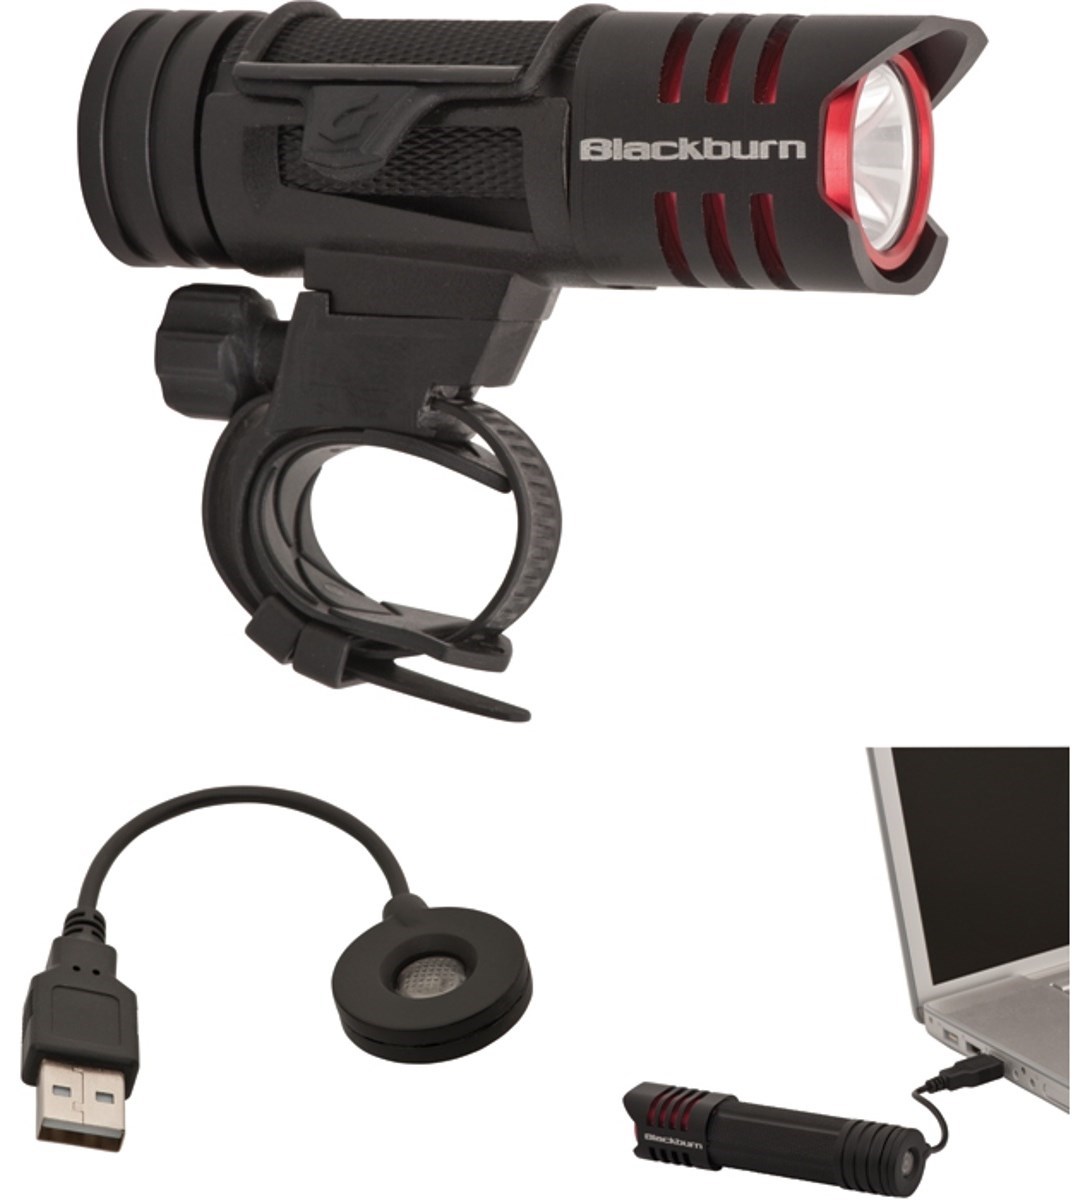 Blackburn Scorch 1.0 USB Rechargeable Front Light product image